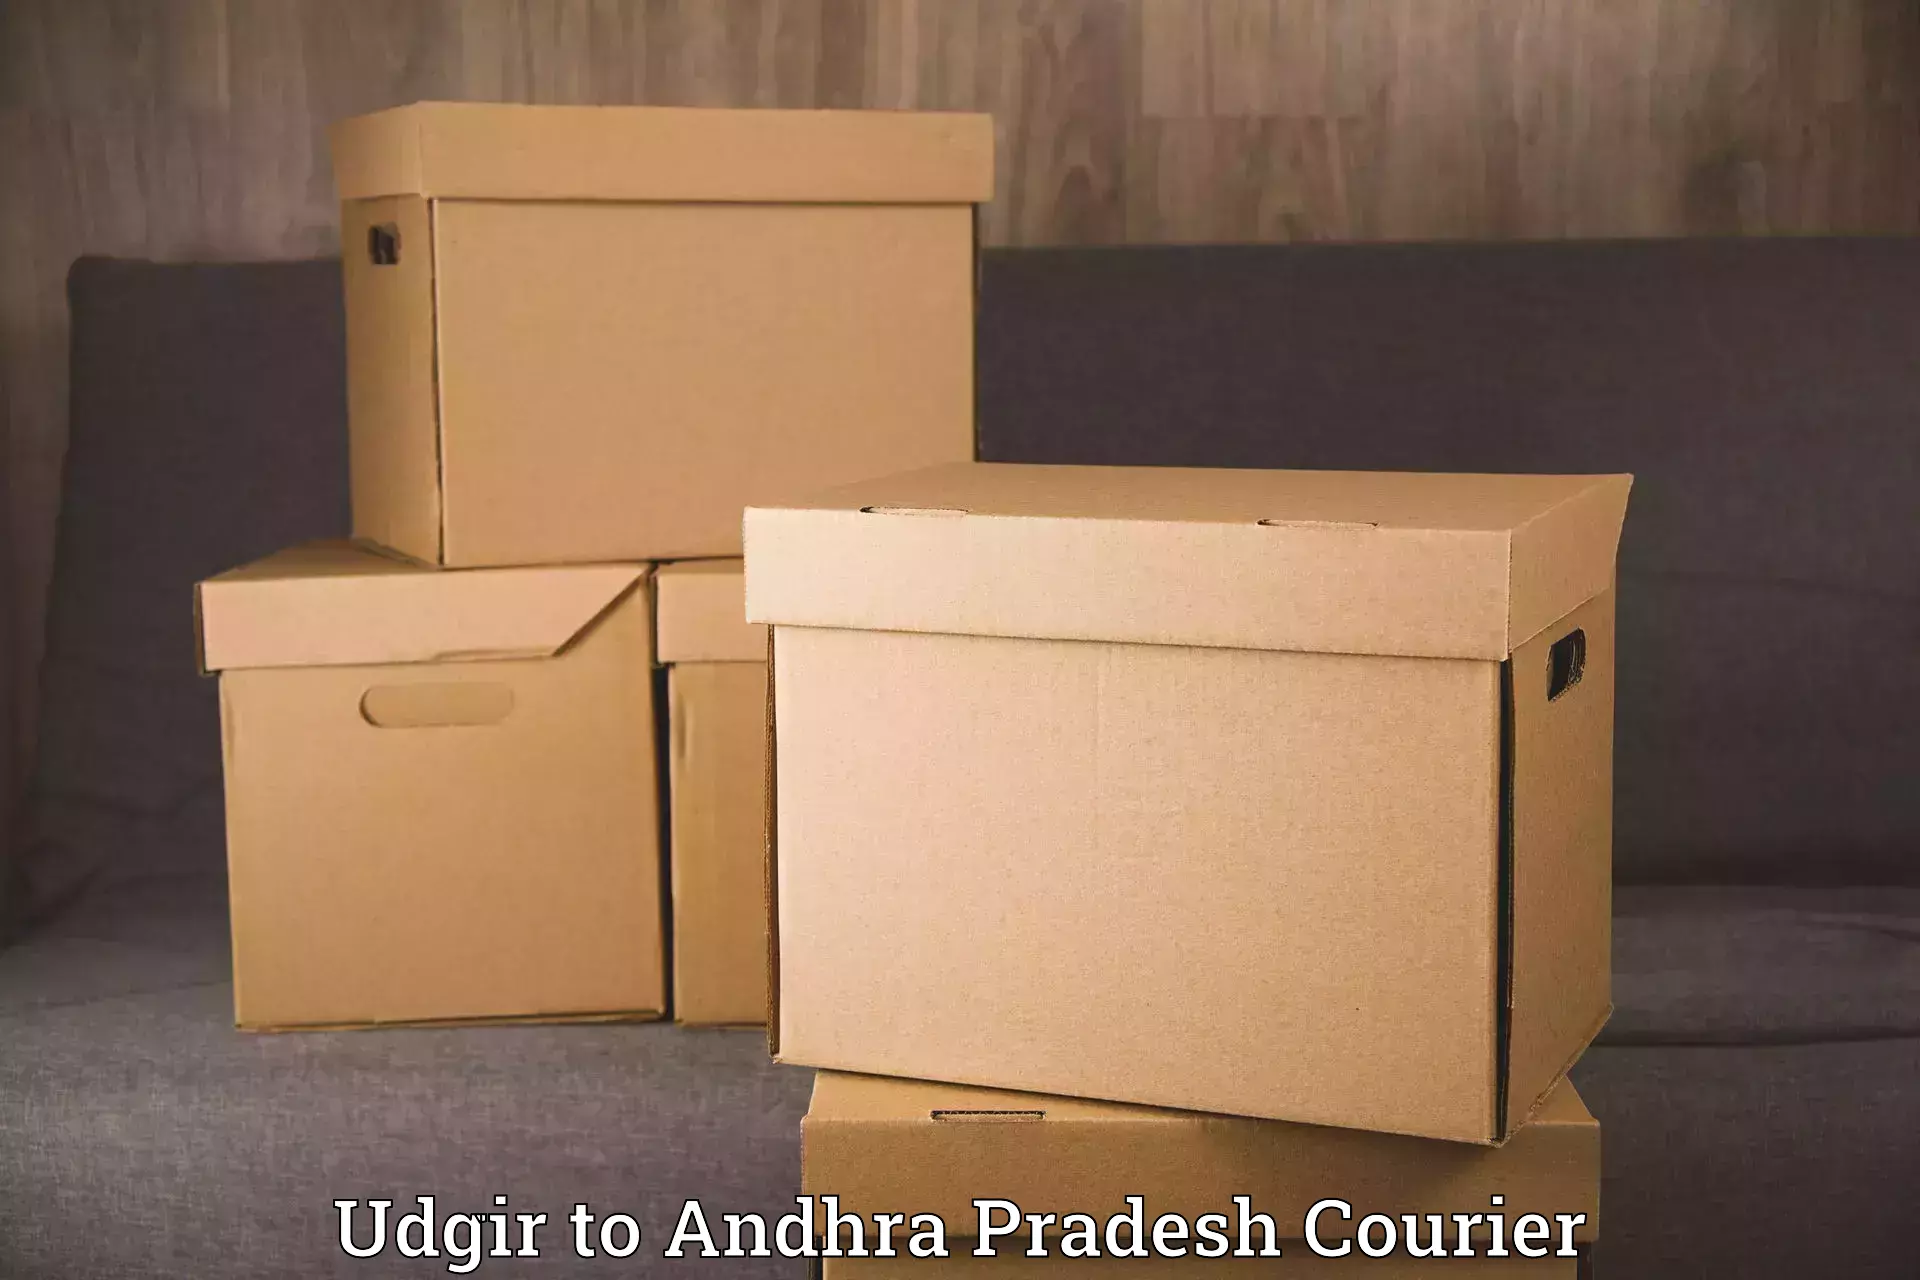 Furniture moving specialists Udgir to Visakhapatnam Port